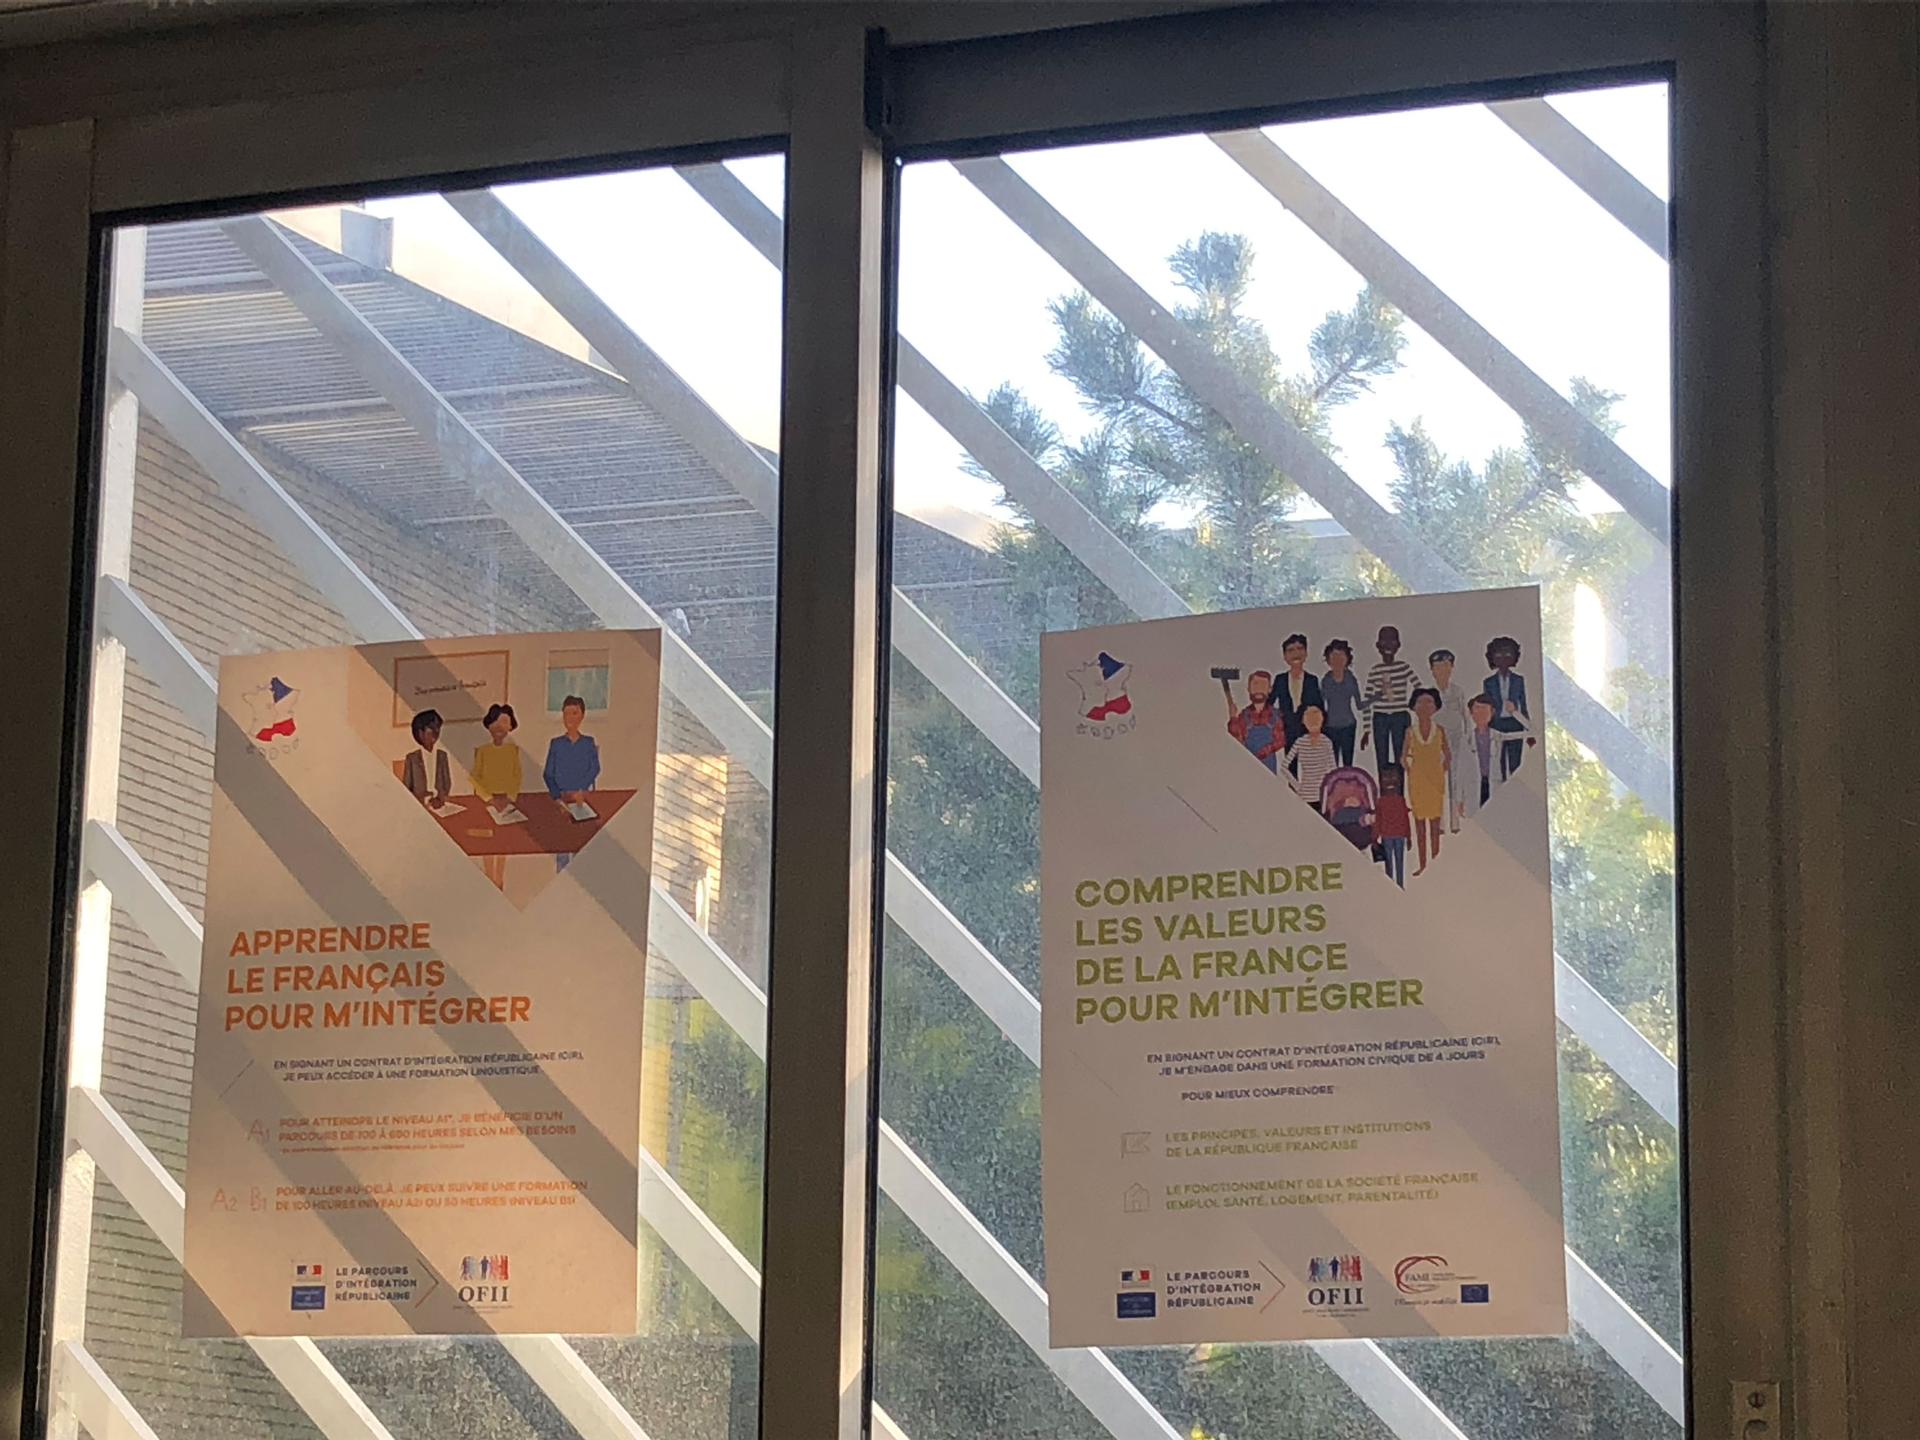 Two posters in French language describe integration expectations to new residents in France.